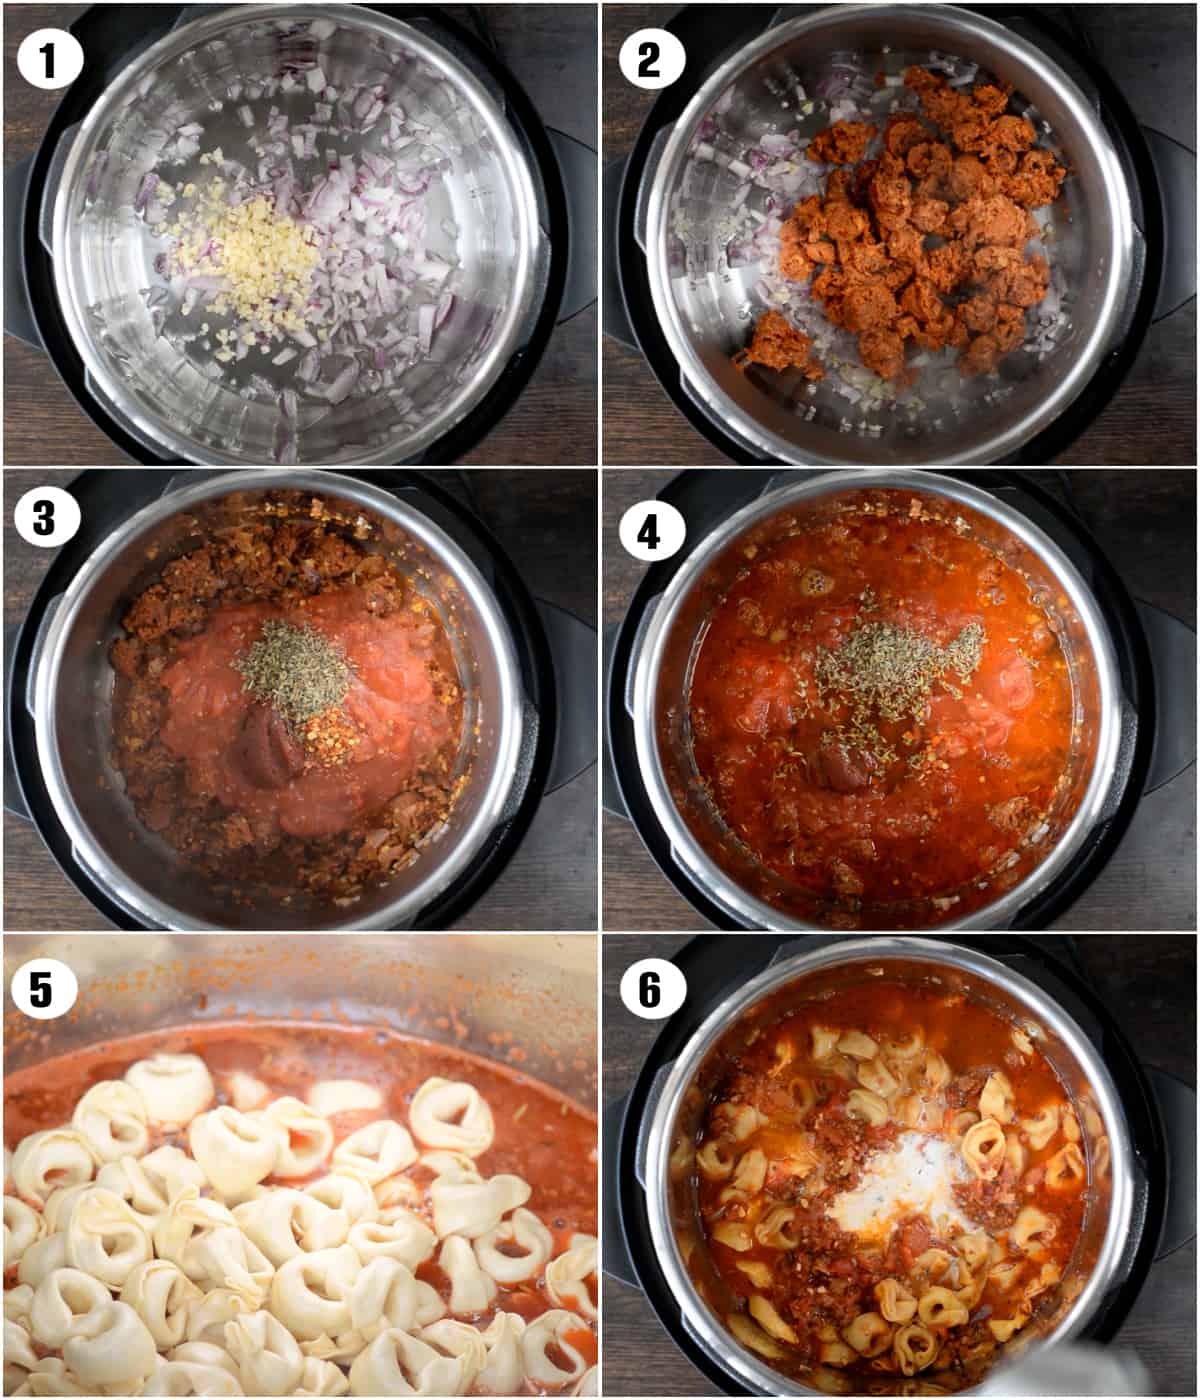 Step by step photos showing how to make sausage tortellini soup